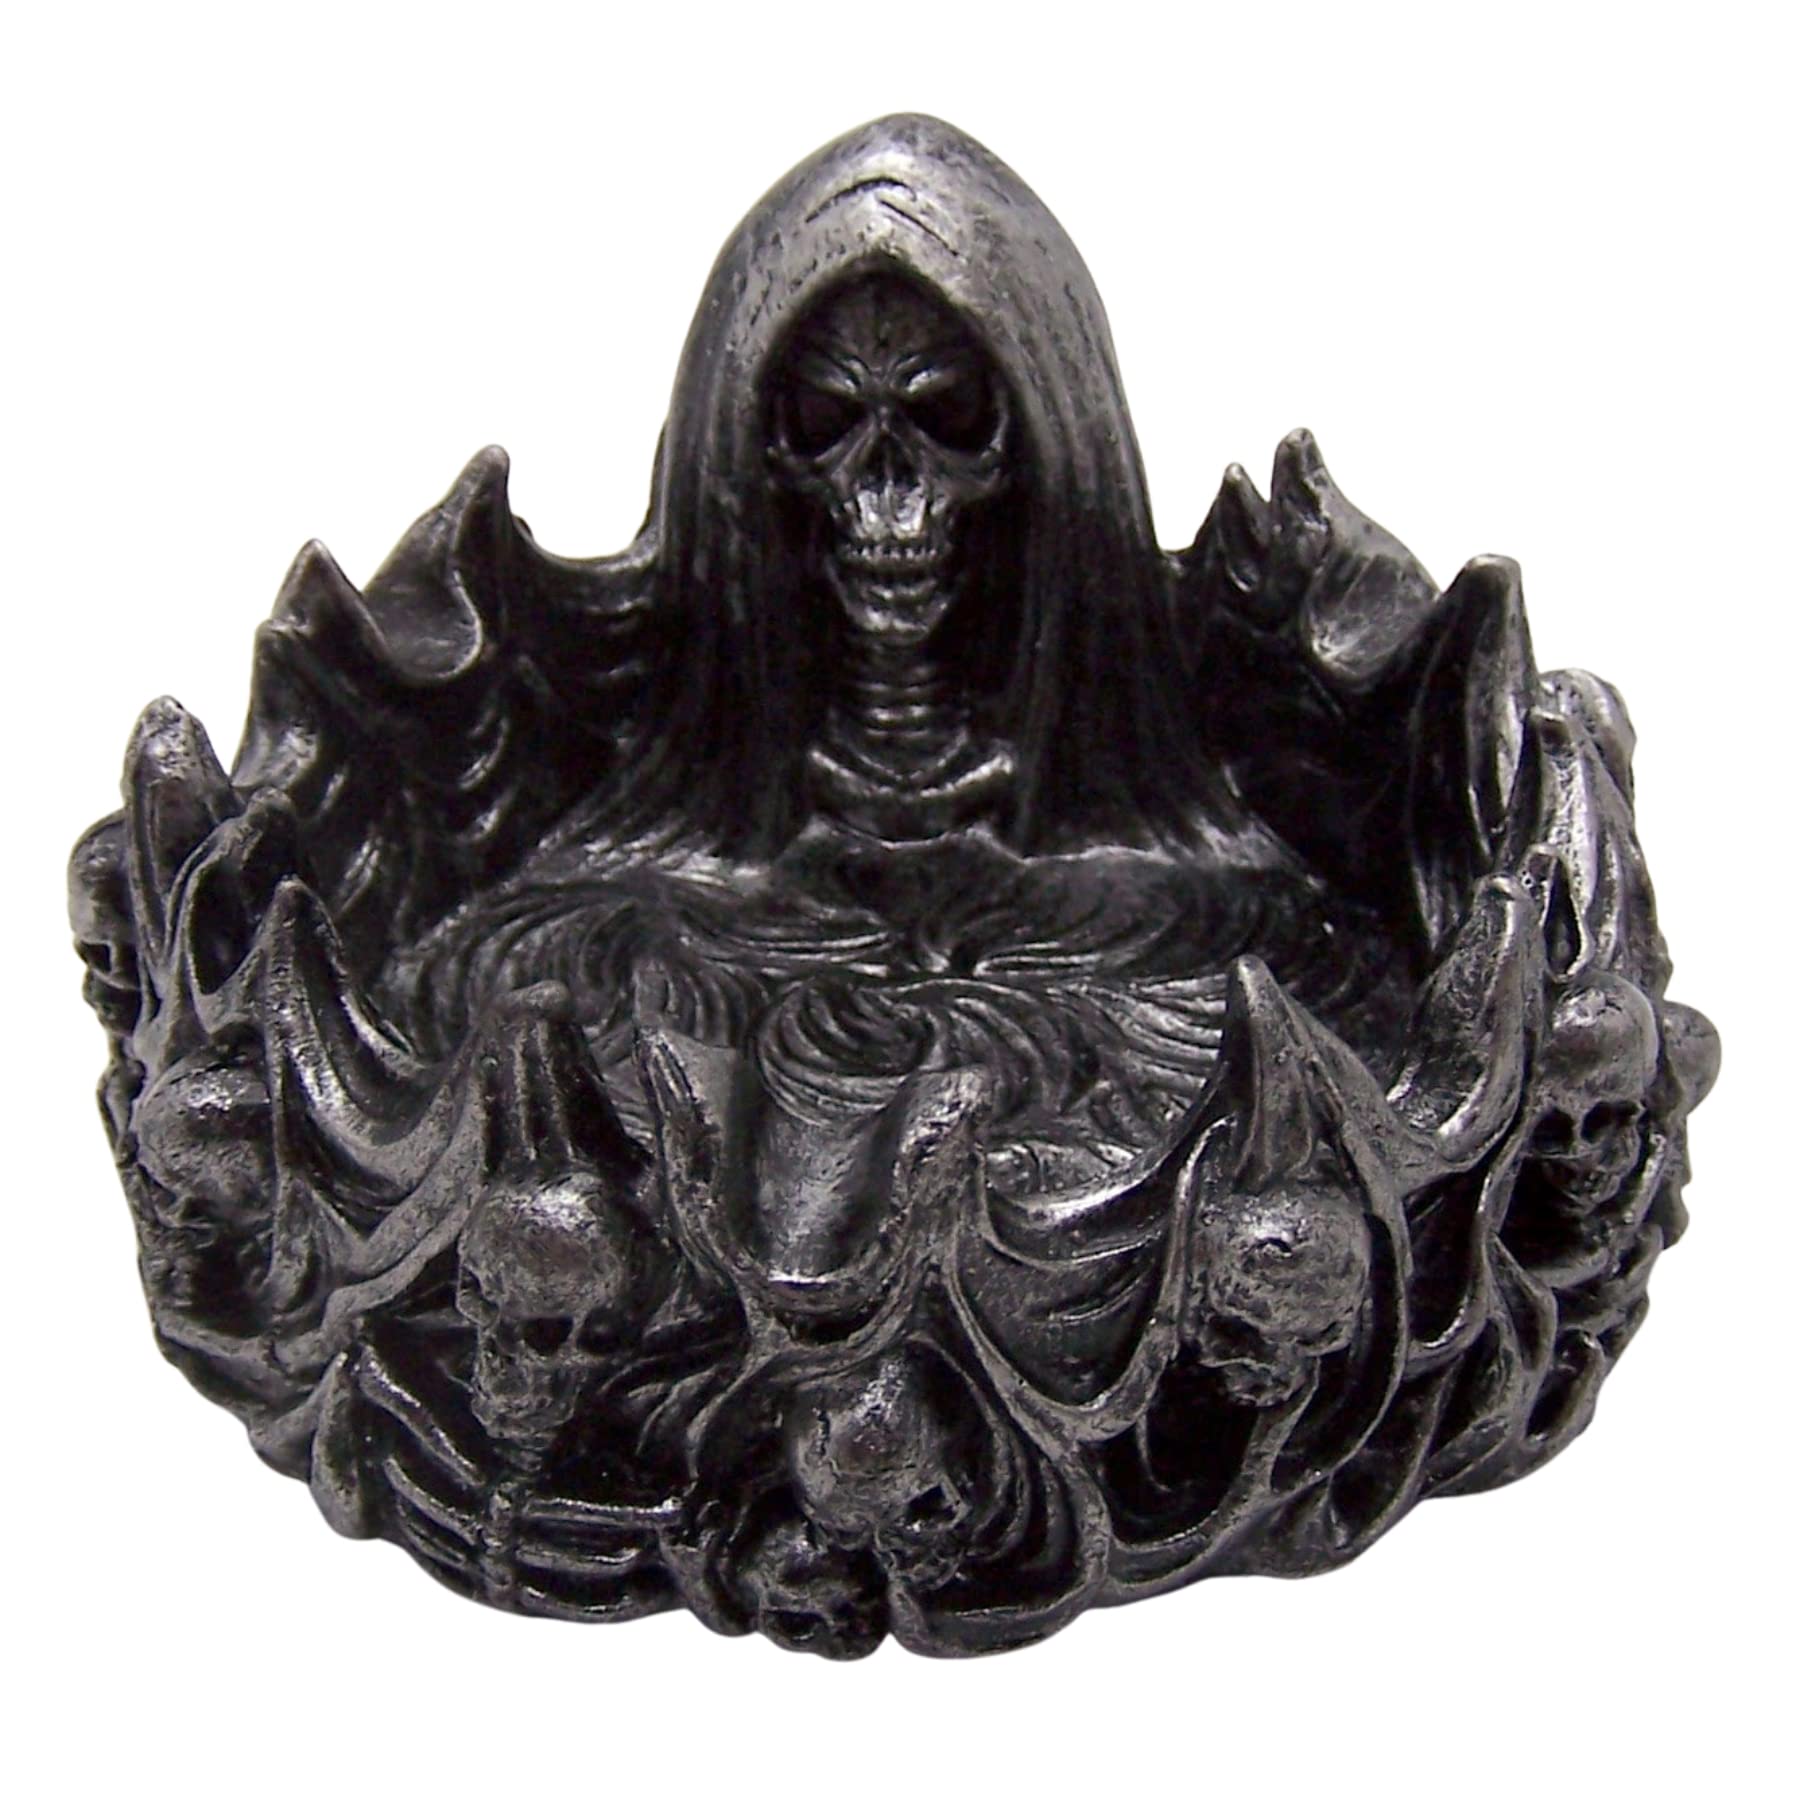 Spooky Grim Reaper Ashtray with Skulls, Freestanding Halloween Decoration, Gothic Accent Piece, 4.75 Inches